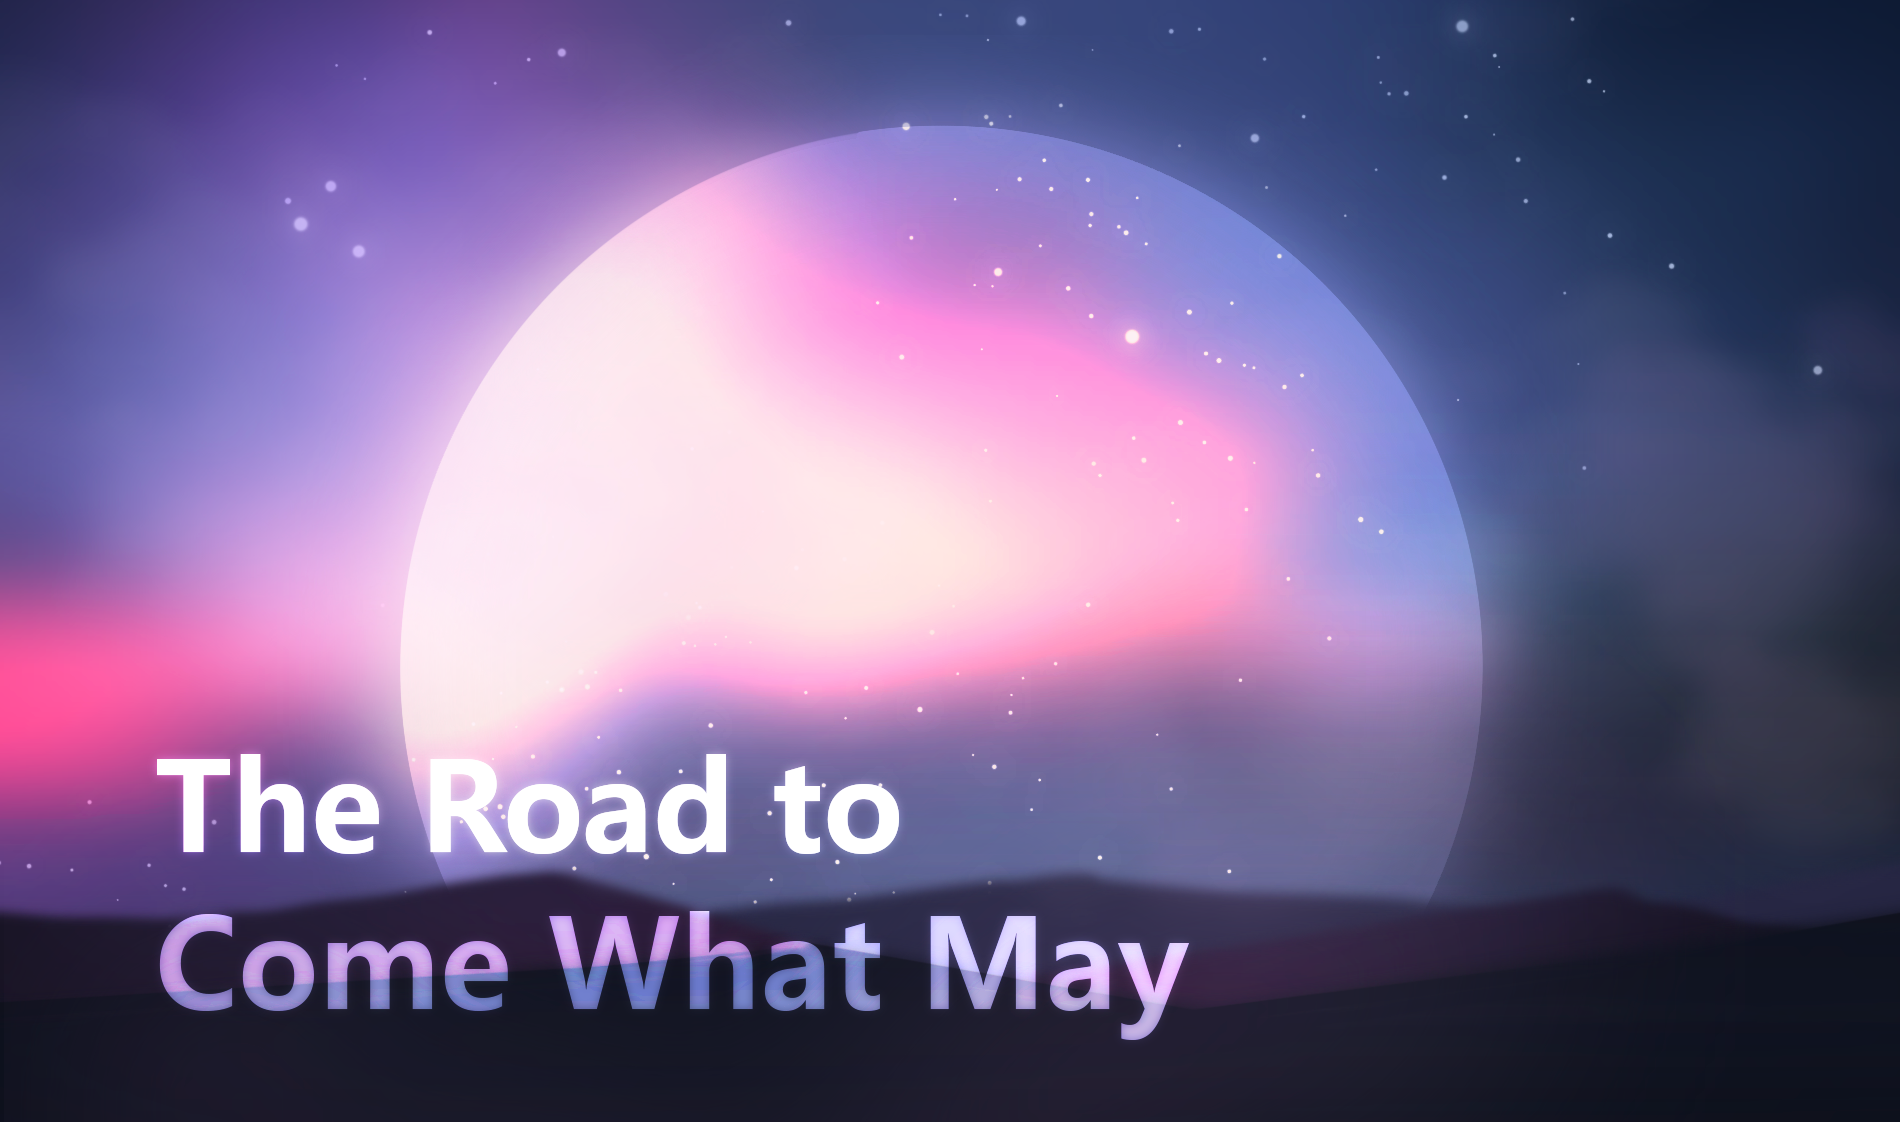 The Road to Come What May